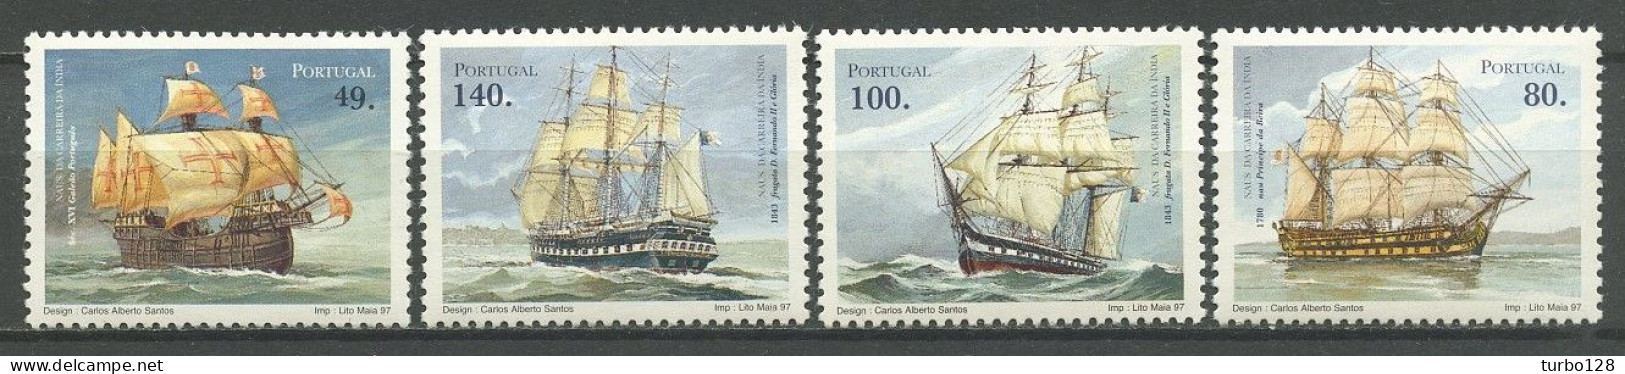 PORTUGAL 1997 N° 2146/2149 ** Neufs MNH Superbes Bateaux Boats Voiliers Sailboat Route Des Indes  Galion Transports - Unused Stamps